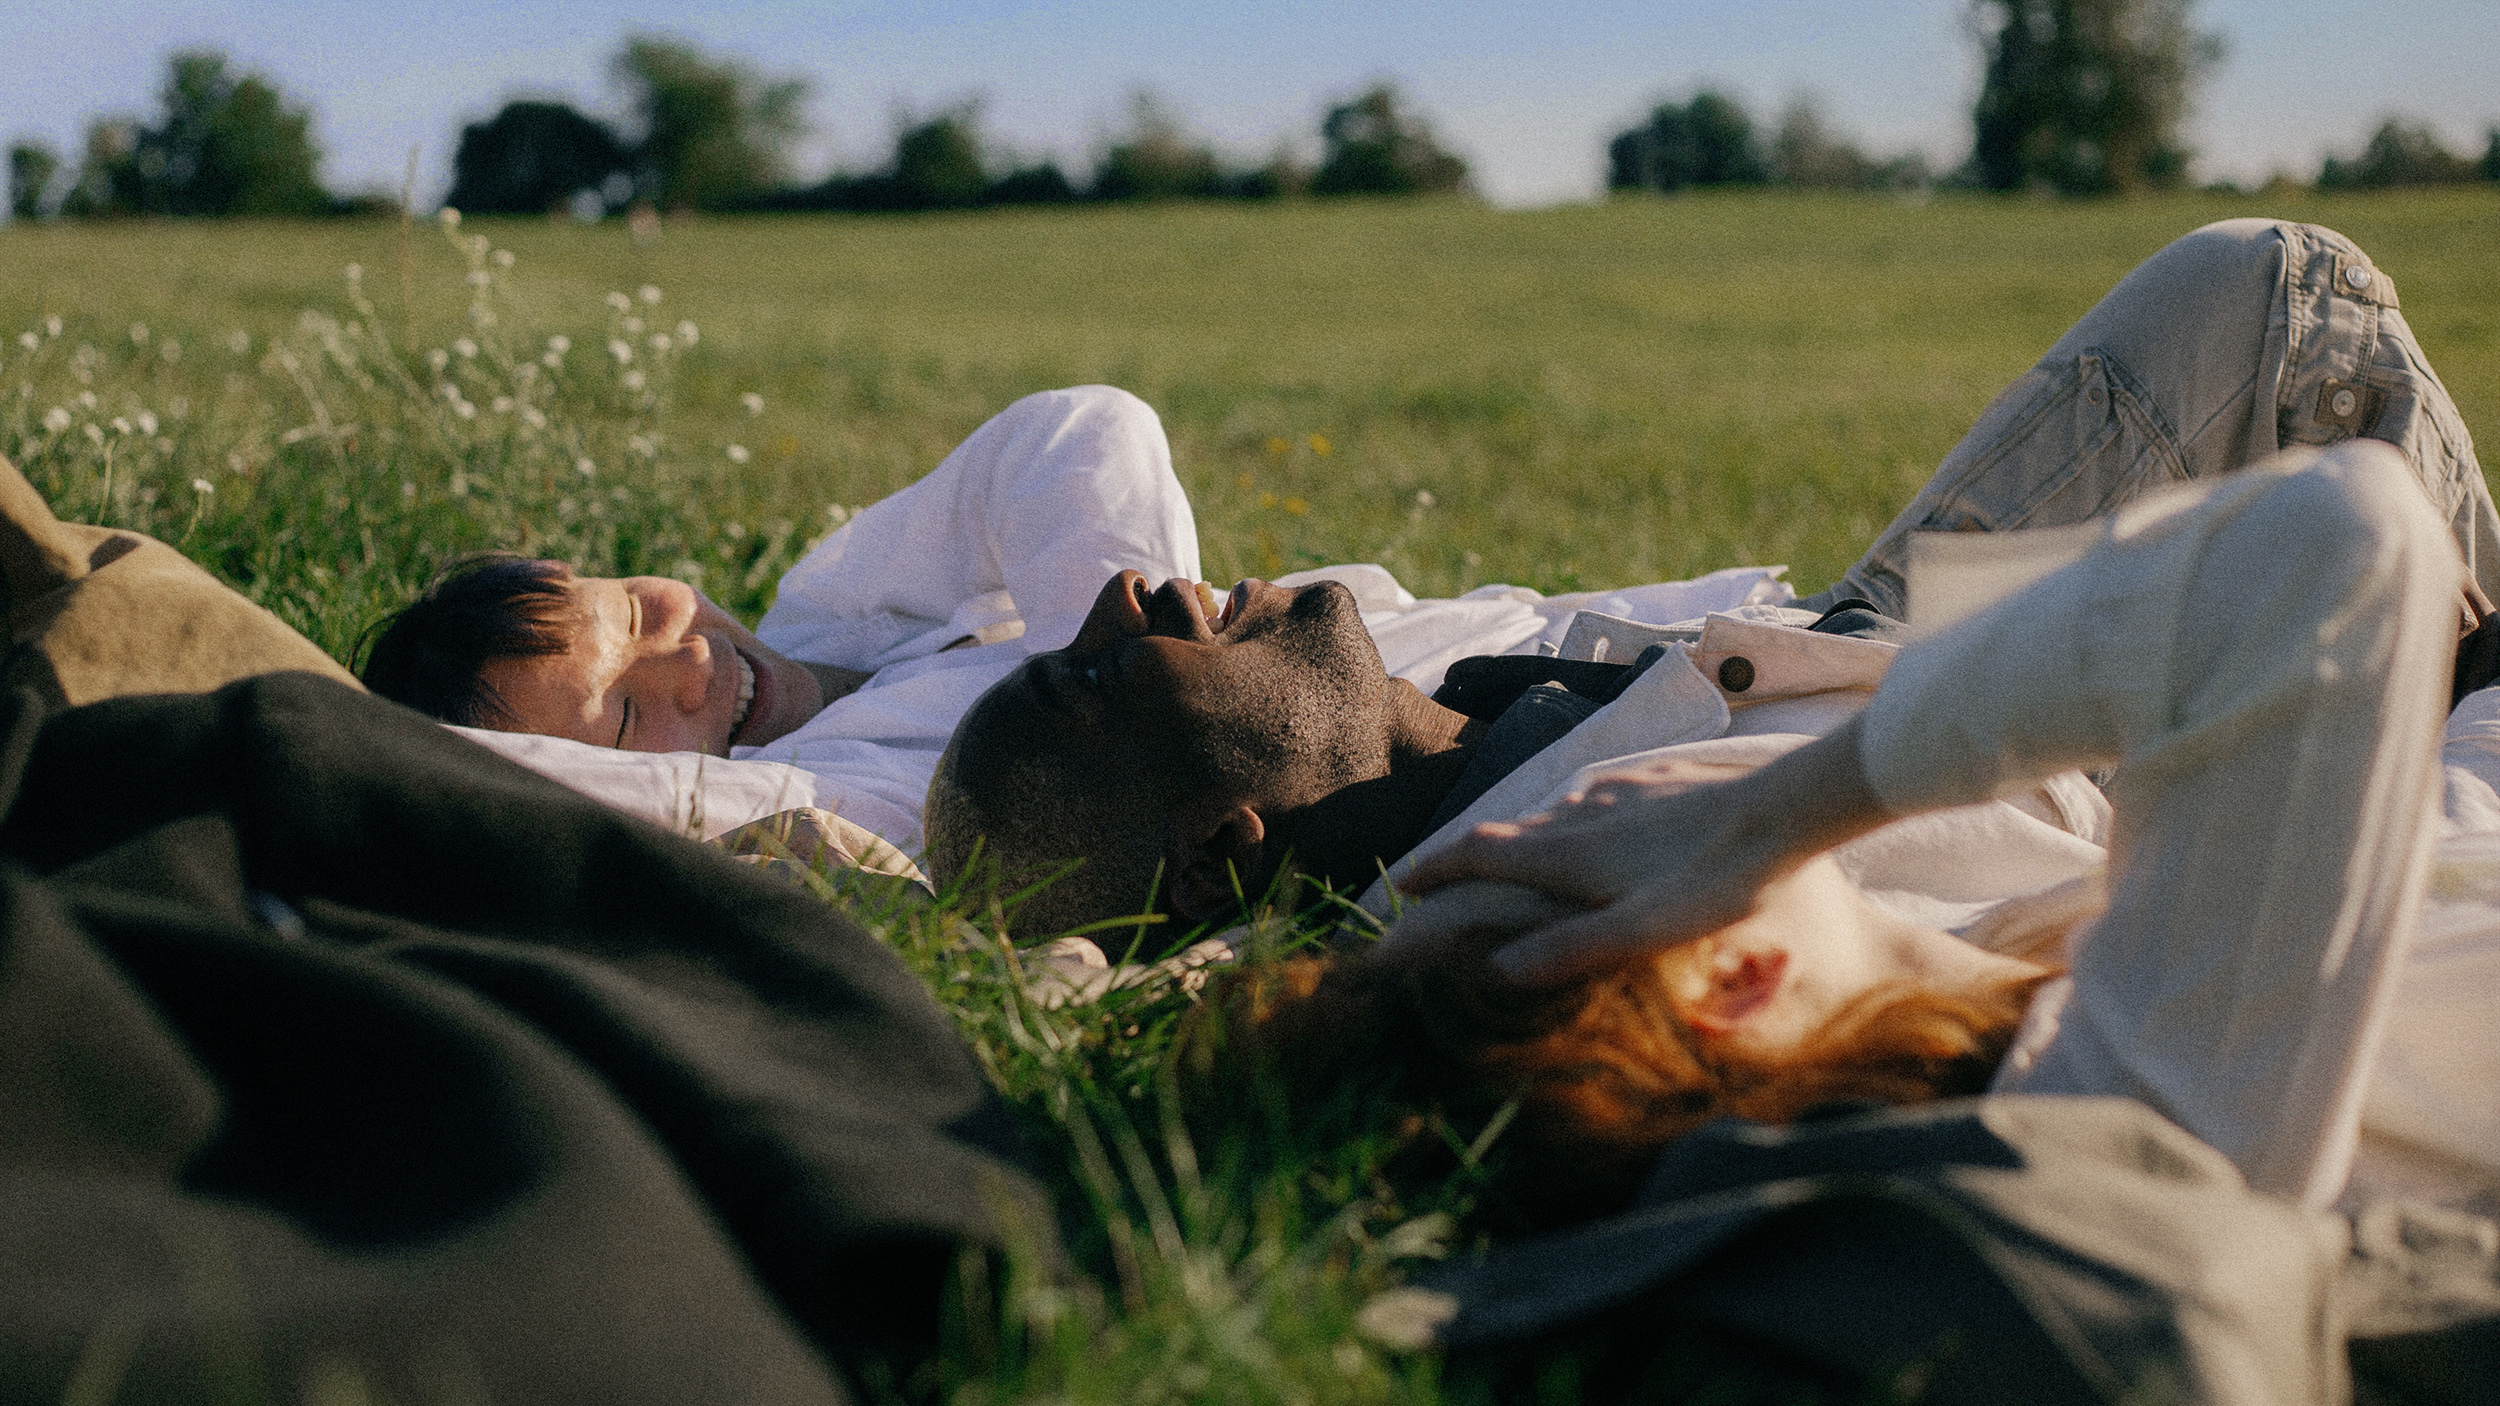 A small gathering of individuals peacefully reclining in a meadow.